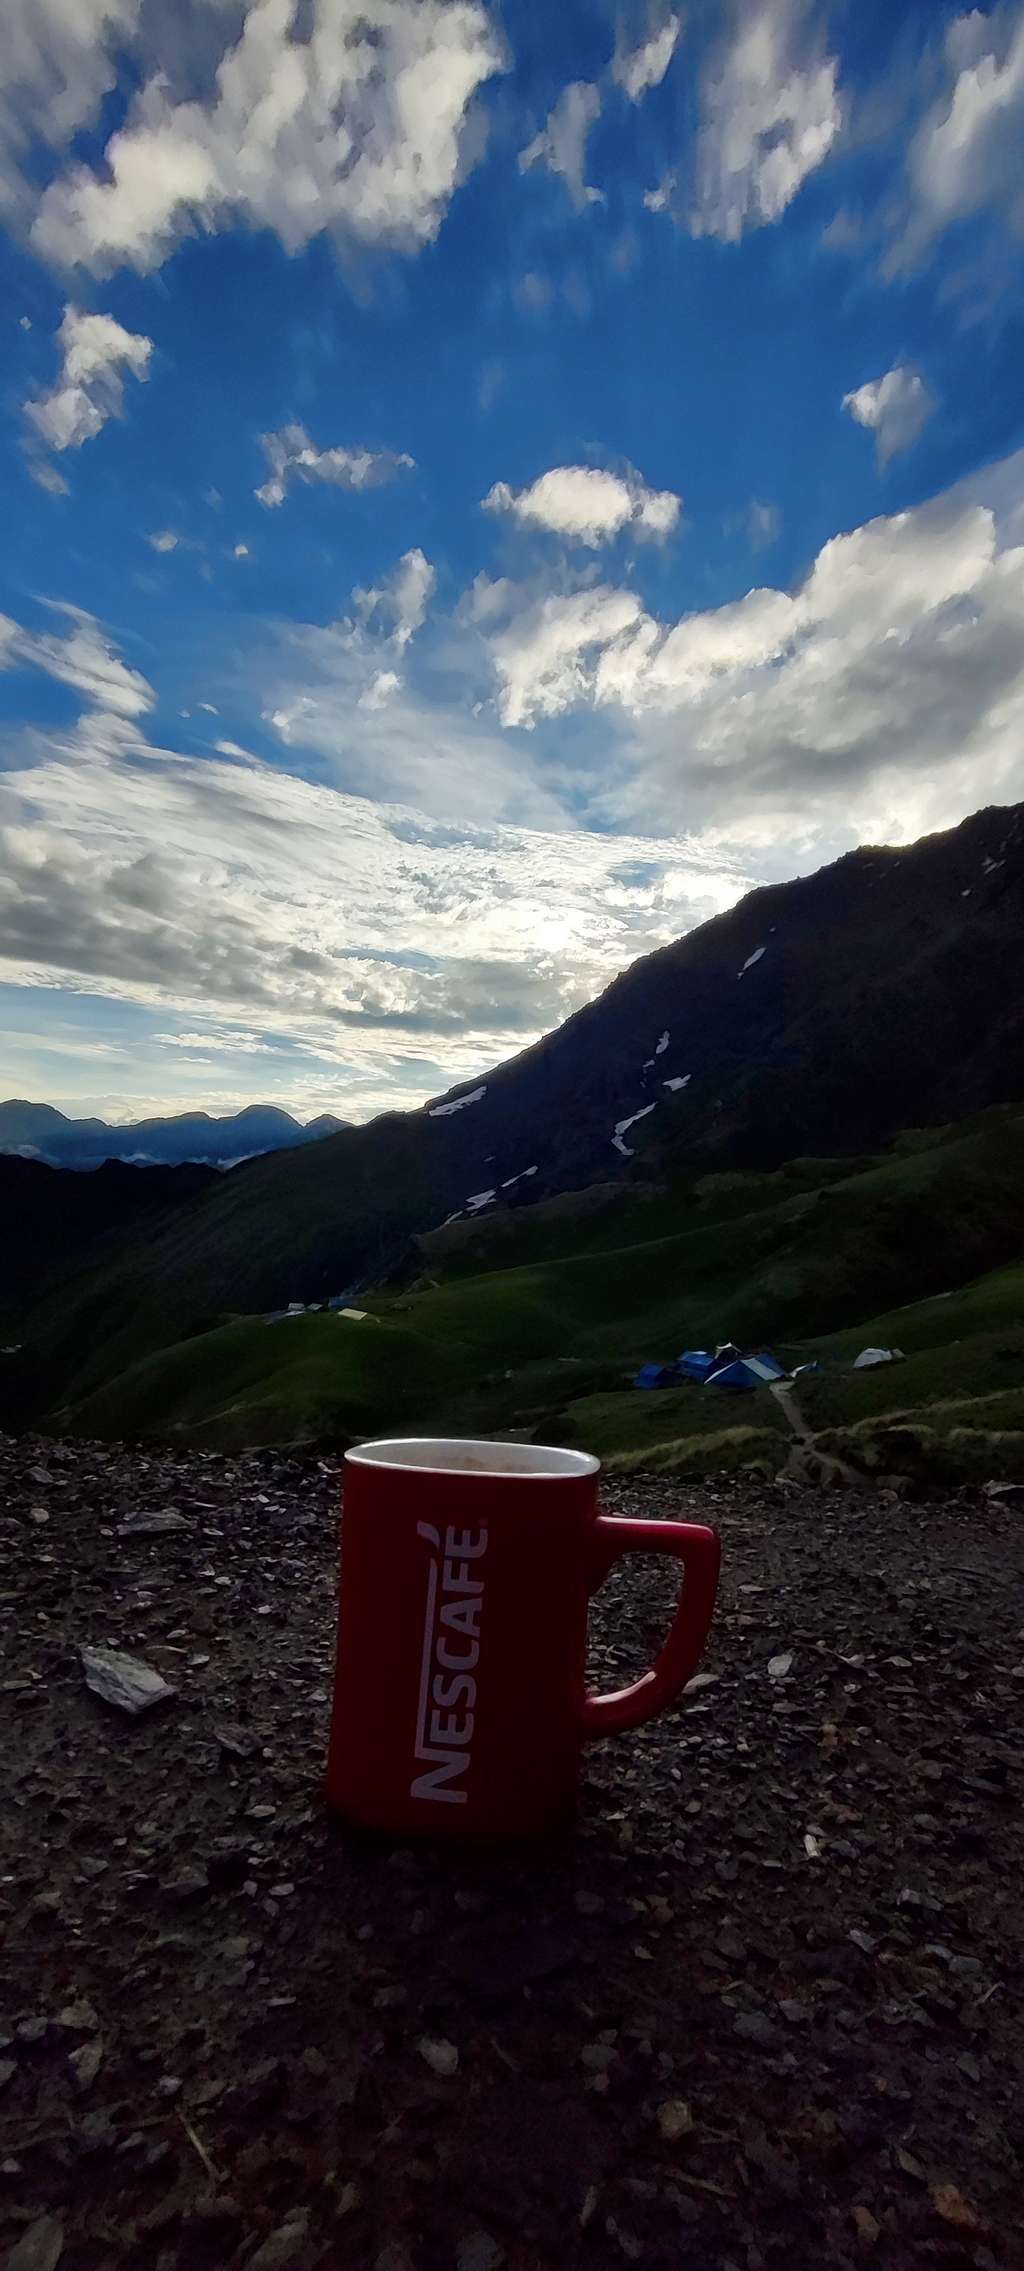 Nescafe with a view